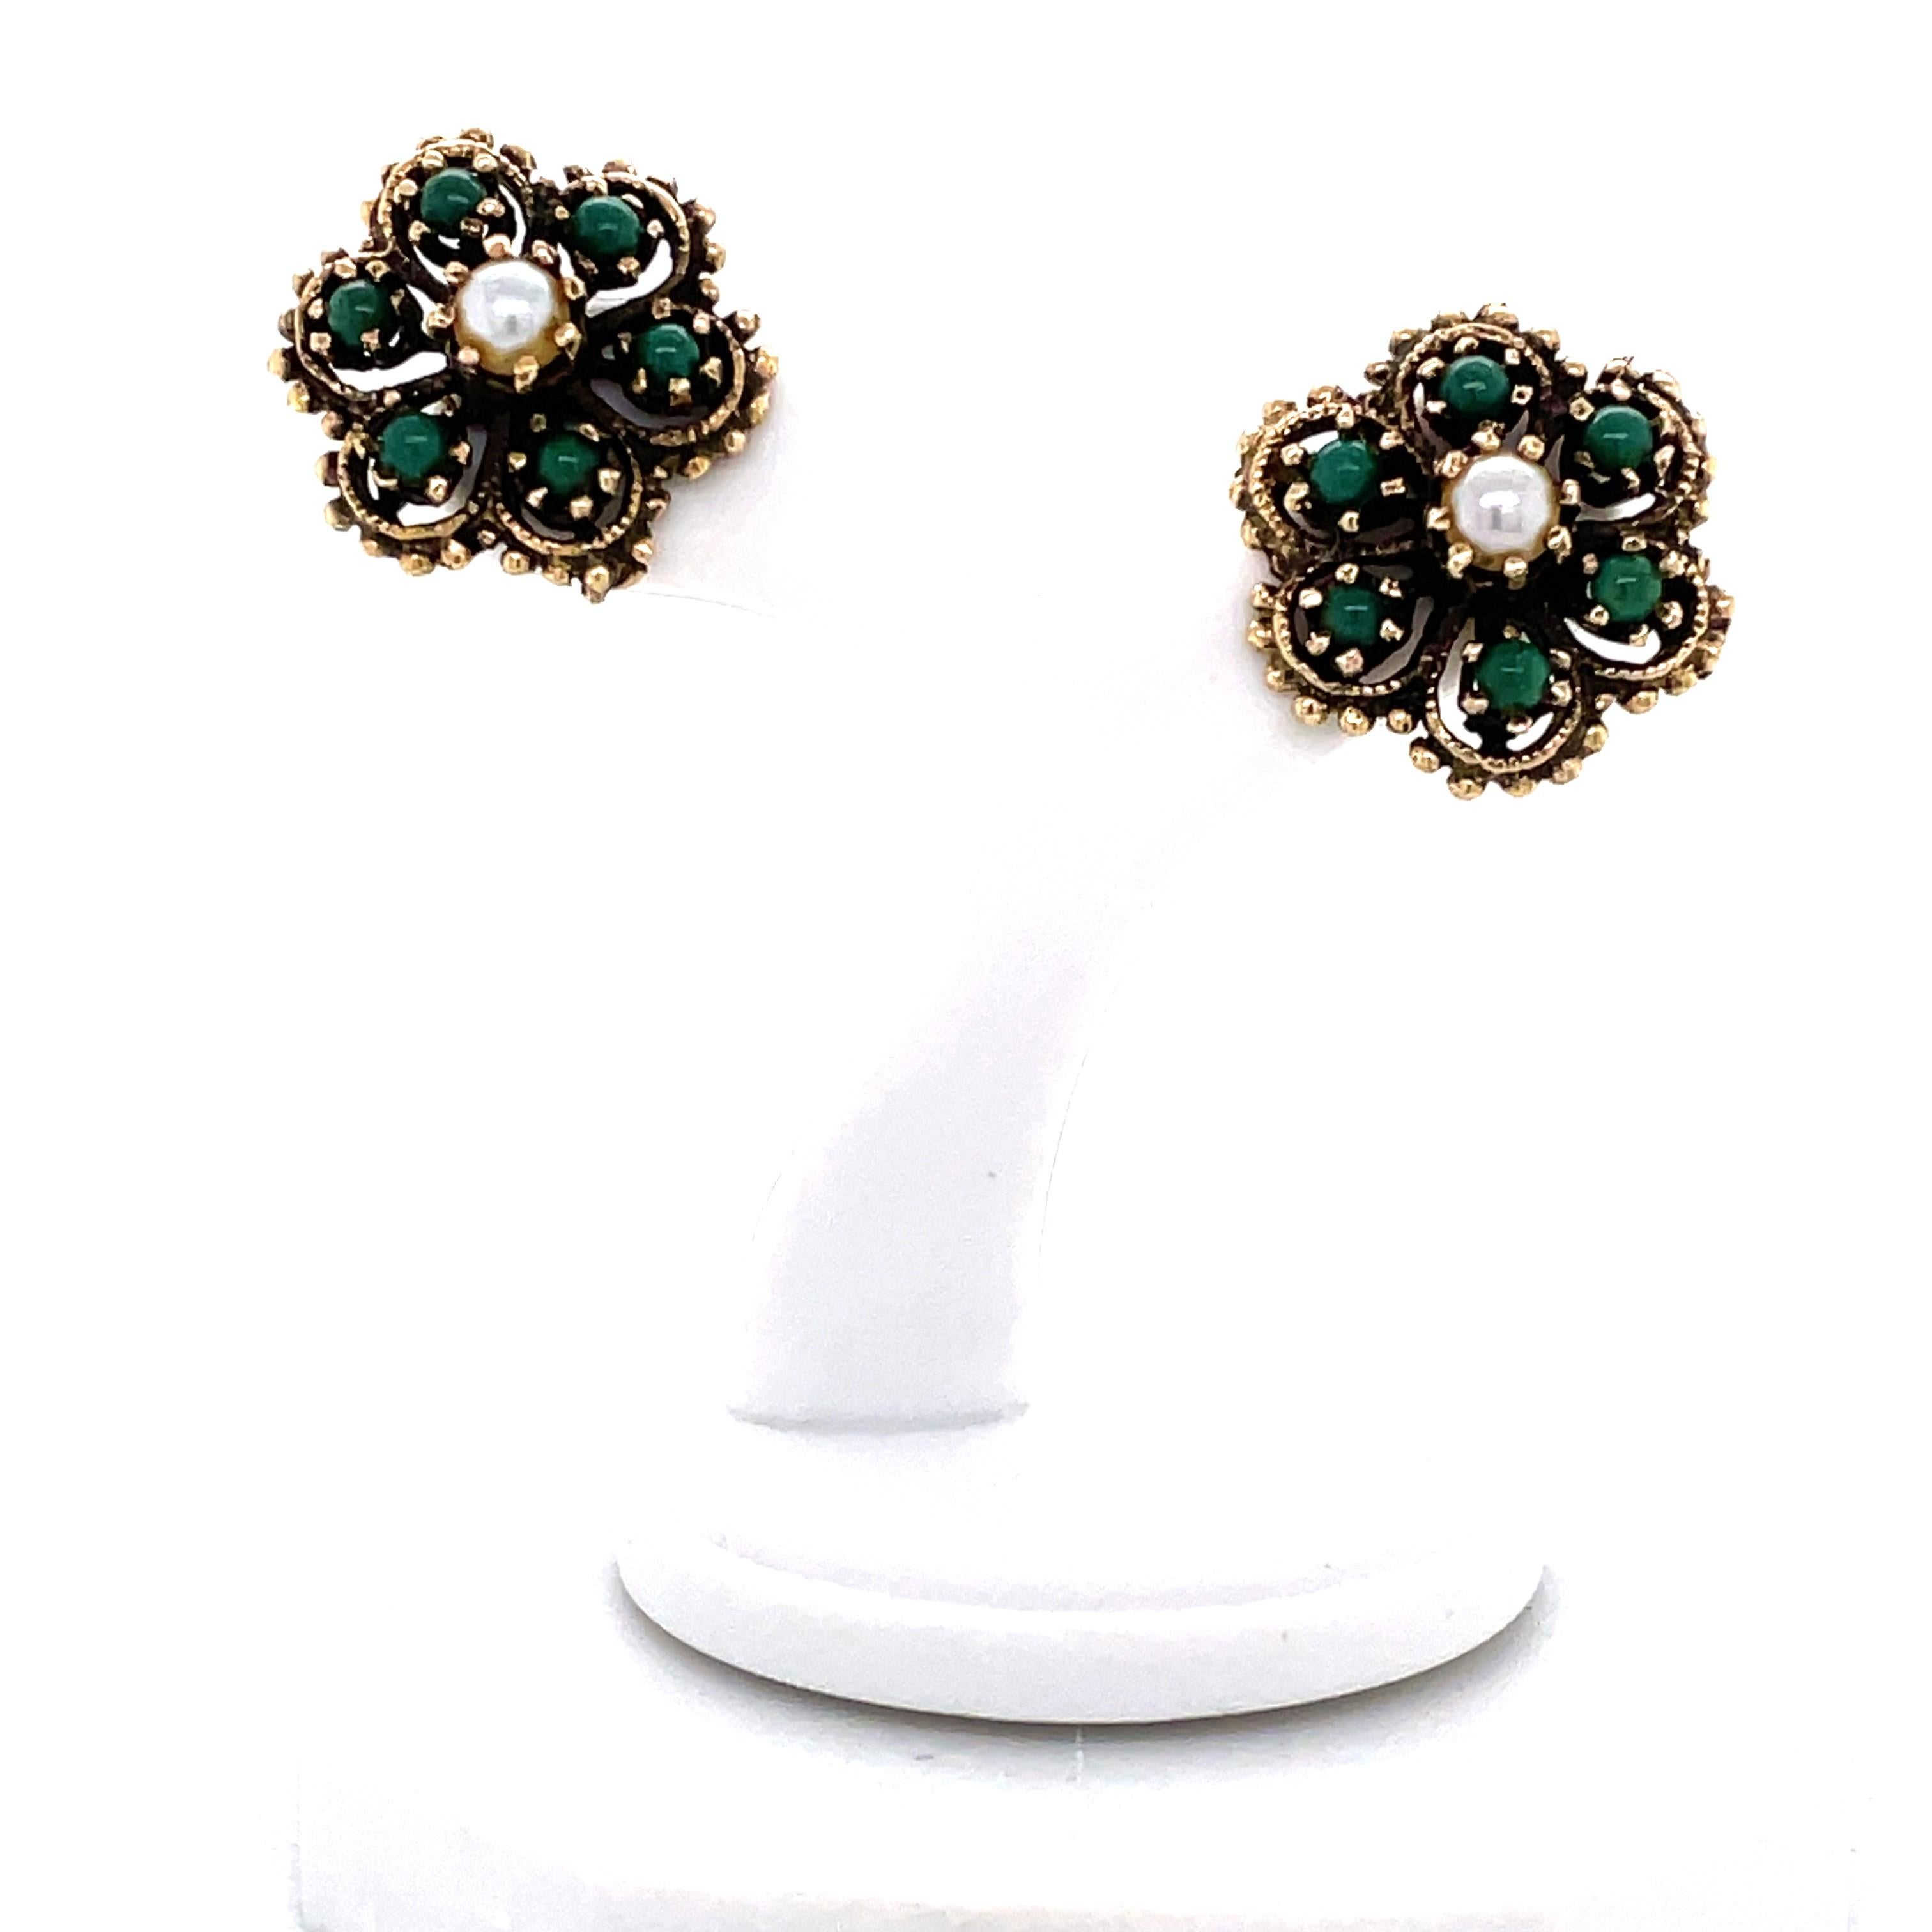 Colorful green turquoise accents the six petals of these adorable  antique style 14 karat yellow gold bud earrings with pearl centers. These stud earrings measure 5/8 inch round and have post backs for pieced ears. Gift boxed.